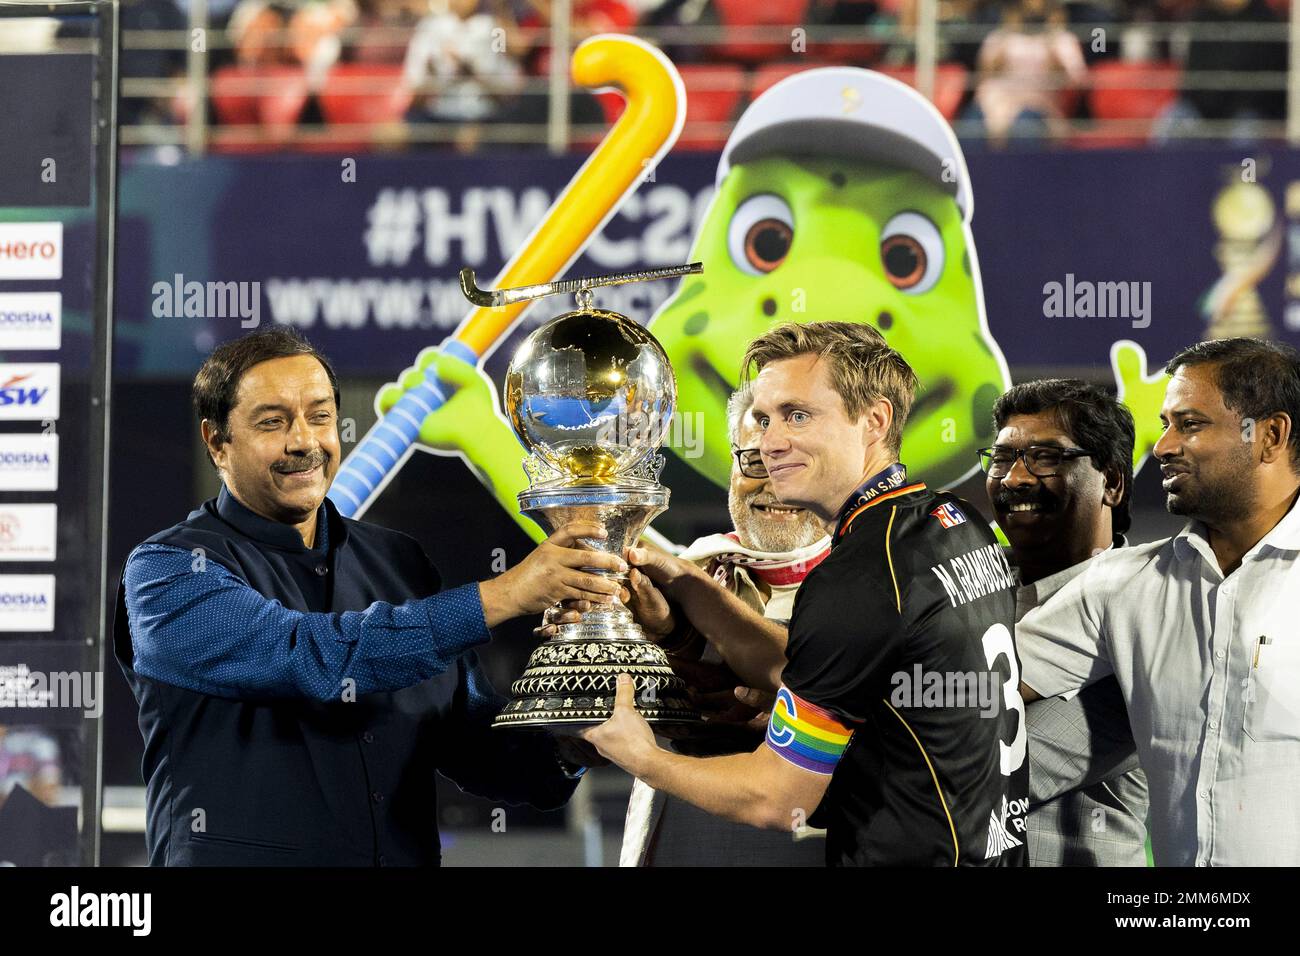 BHUBANESWAR - Germany's captain Mats Grambusch receives the cup after  winning the world title after winning 5-4 in the shoot-outs against Belgium  during the final of the Hockey World Cup in India.